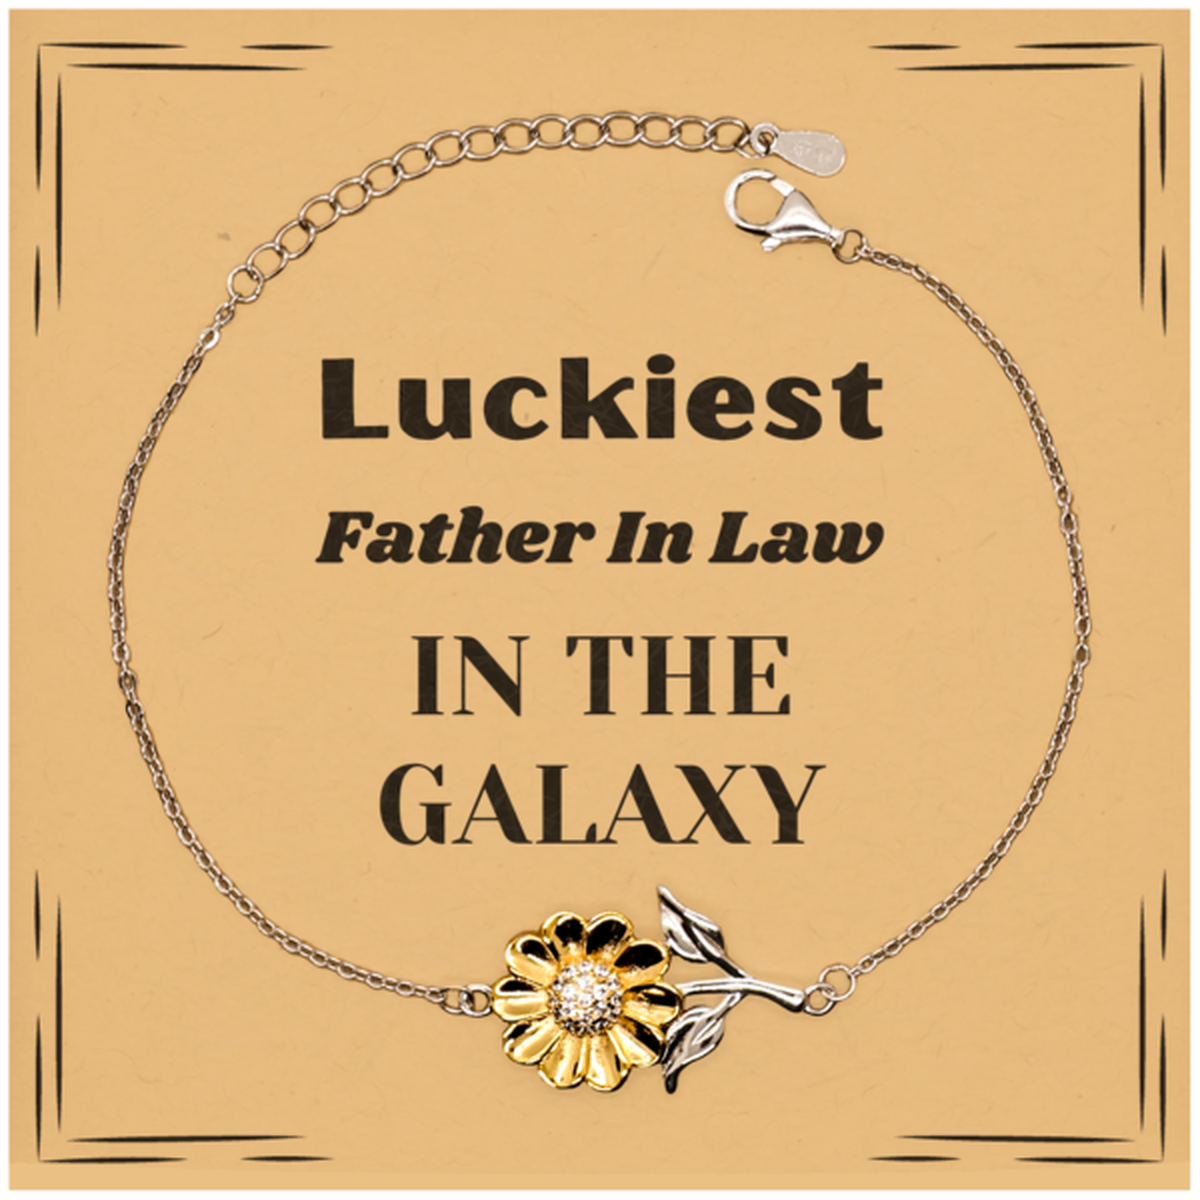 Luckiest Father In Law in the Galaxy, To My Father In Law Message Card Gifts, Christmas Father In Law Sunflower Bracelet Gifts, X-mas Birthday Unique Gifts For Father In Law Men Women